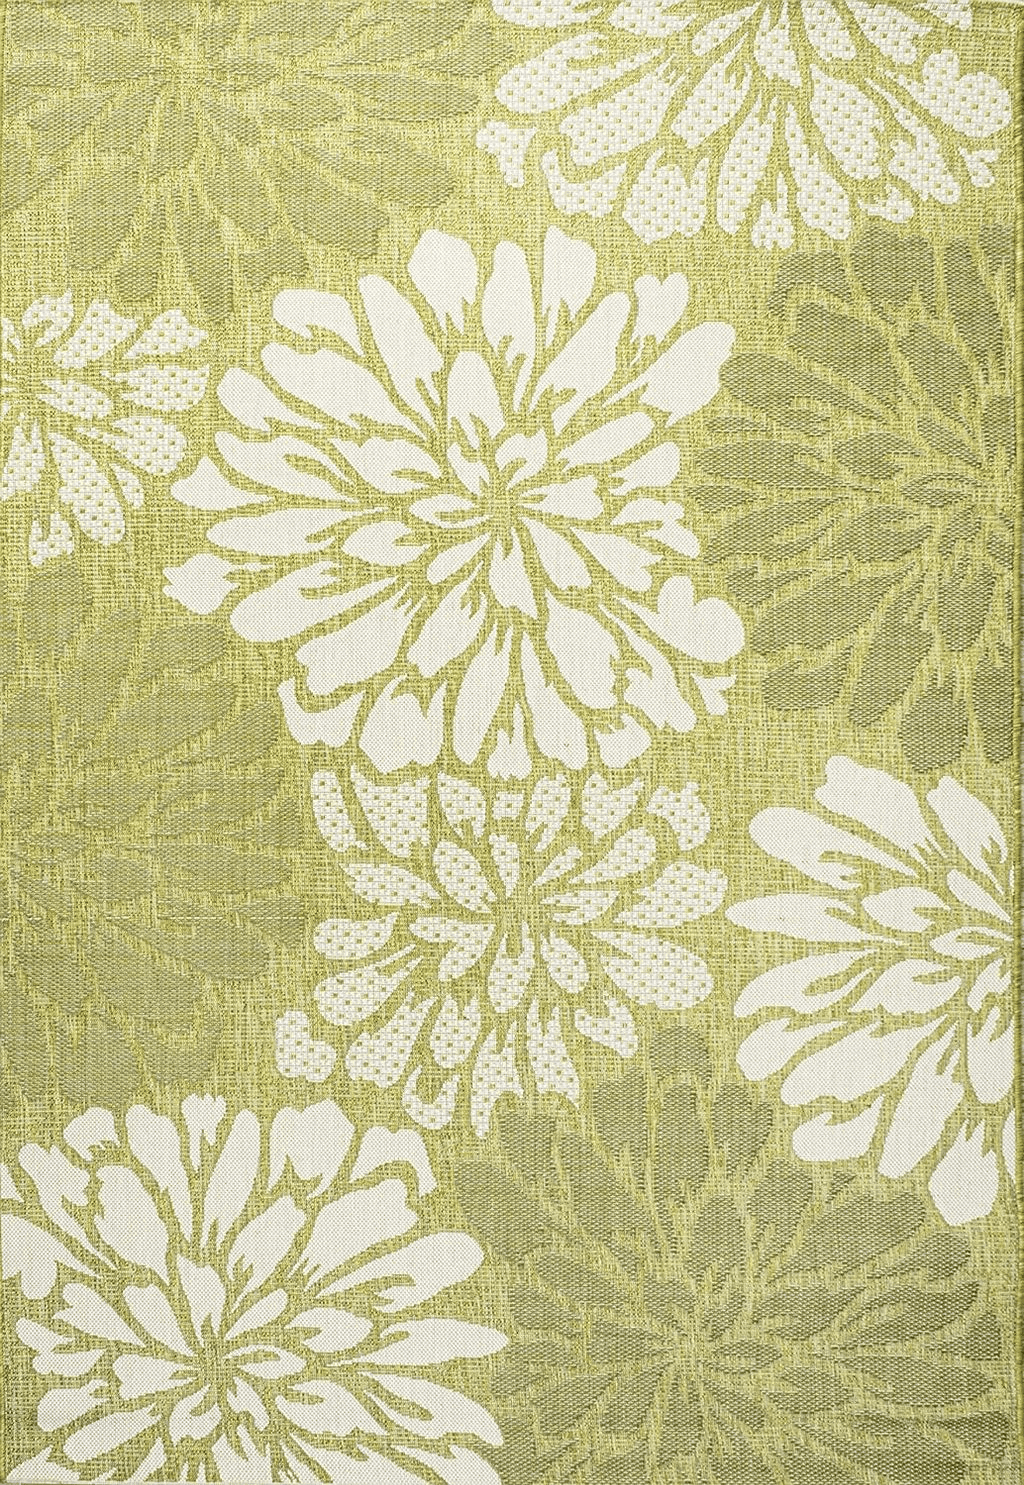 Area 9x12 Eyely BMS110H-9 Santa Monica Zinnia Modern Floral Textured Weave Indoor/Outdoor Area Rug Coastal;Glam, Bedroom, Backyard, Patio, Easy-Cleaning, Non-Shedding, 9 X 12, Green/Cream